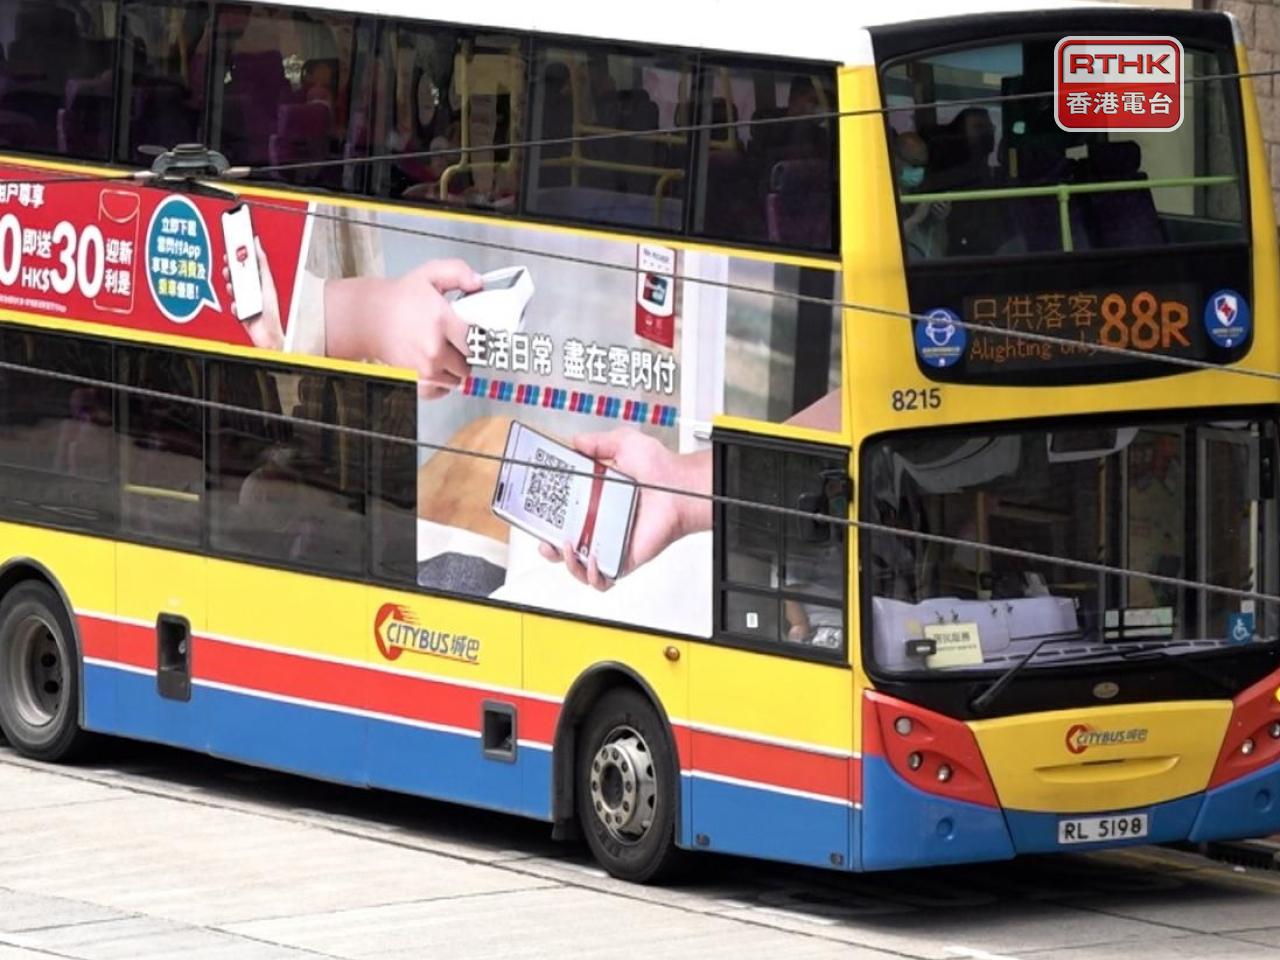 Citybus staff to get 3.6 percent pay rise